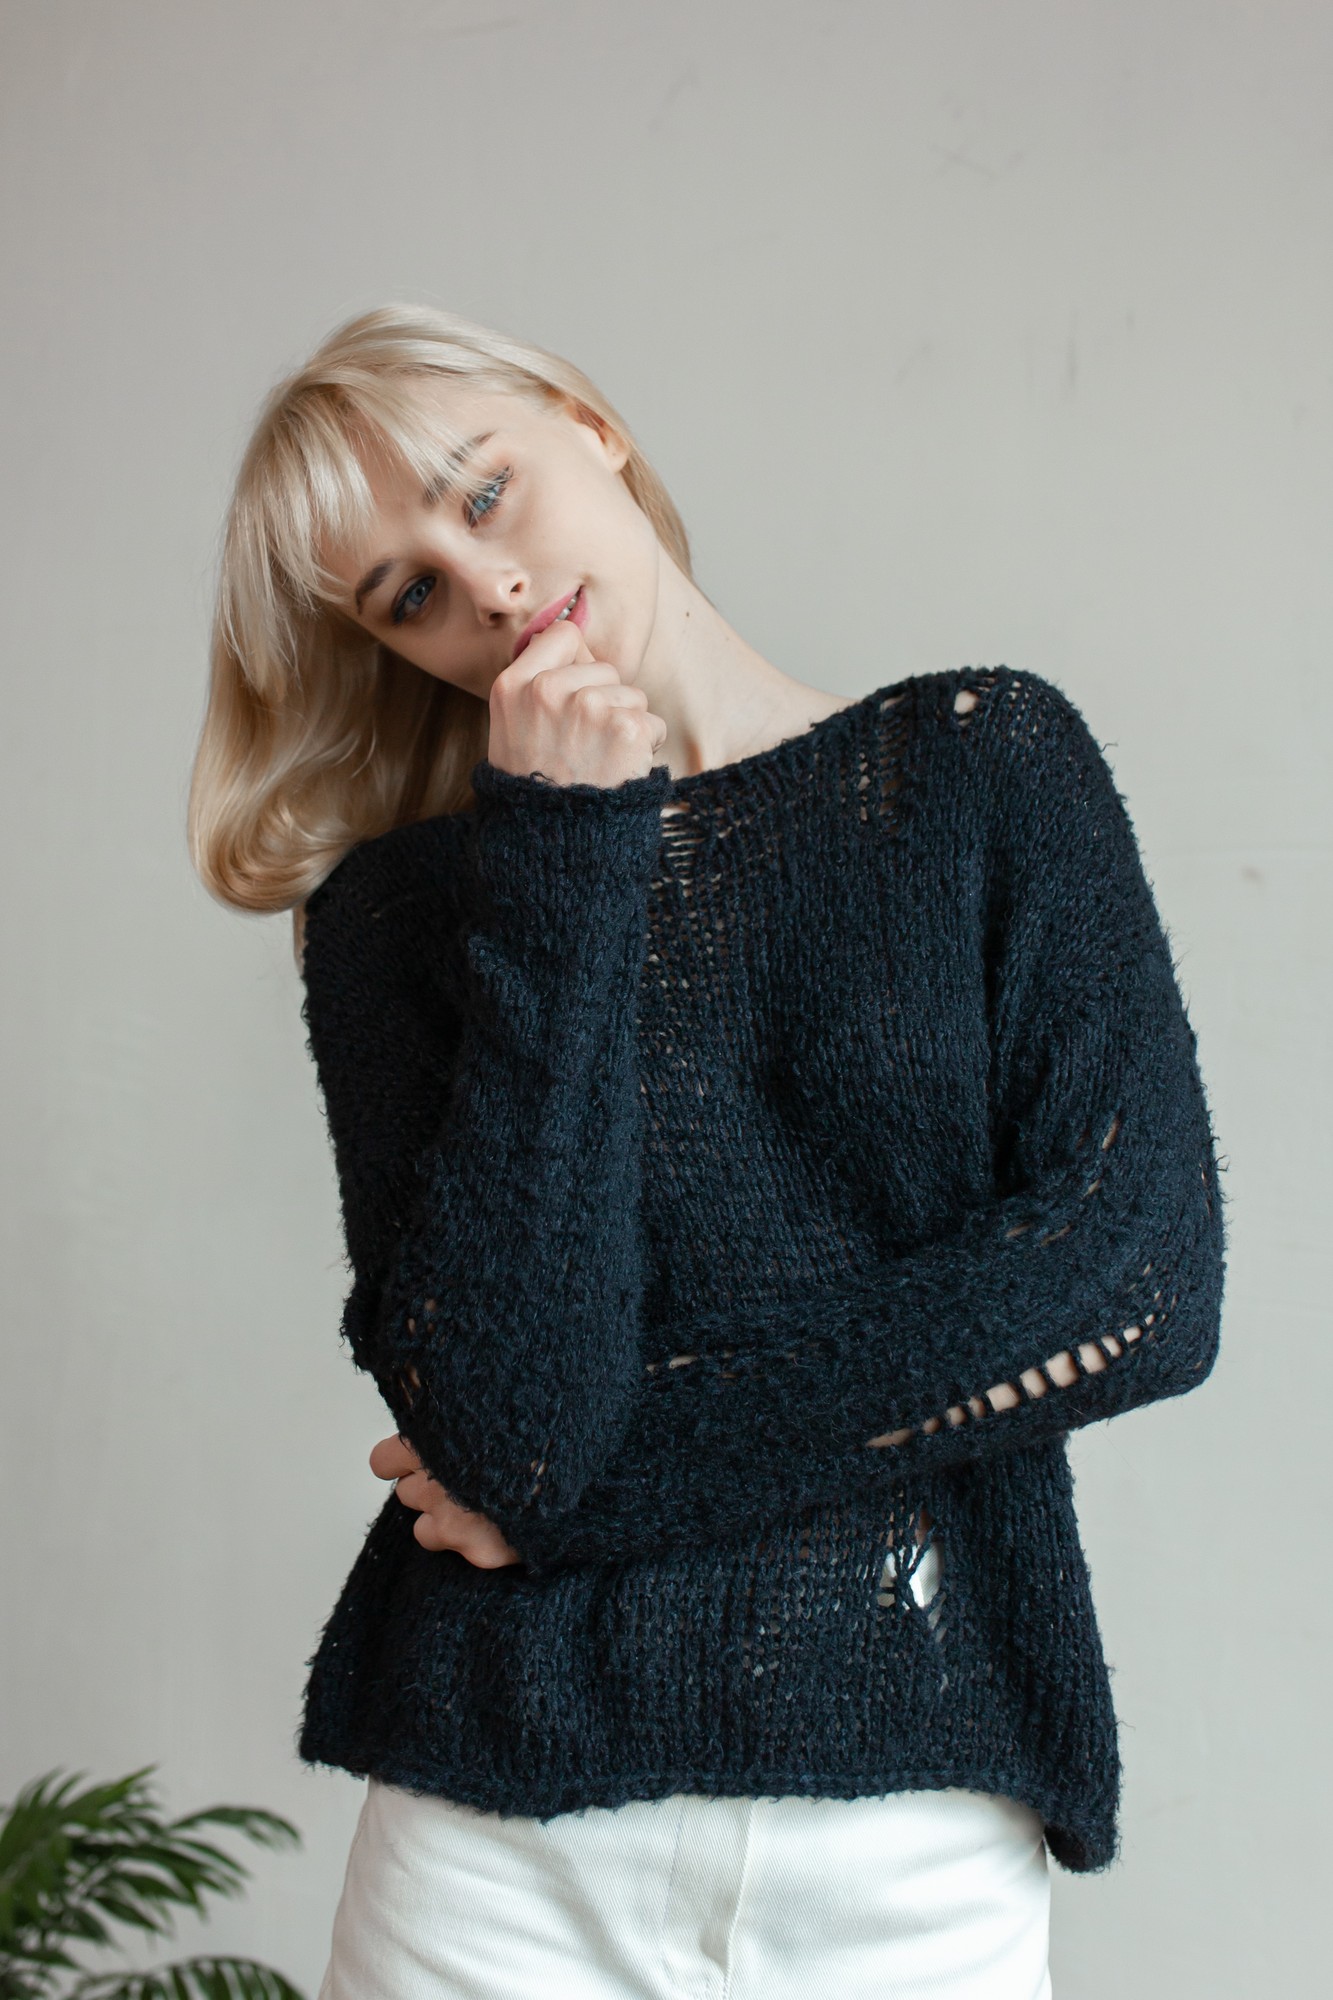 Silk black hand-knitted sweater in stock